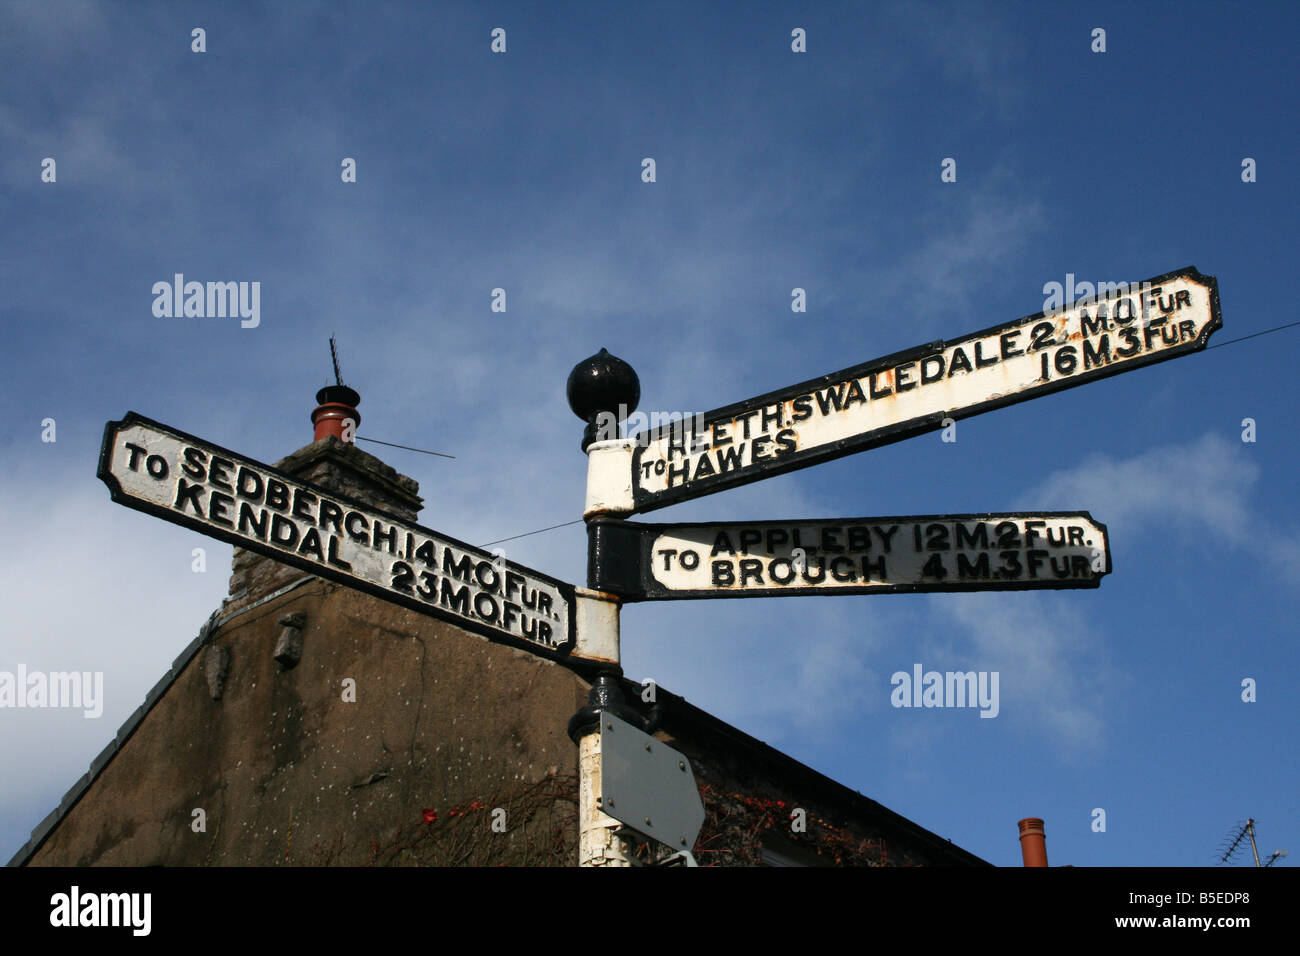 signpost-showing-distances-in-miles-and-furlongs-B5EDP8.jpg